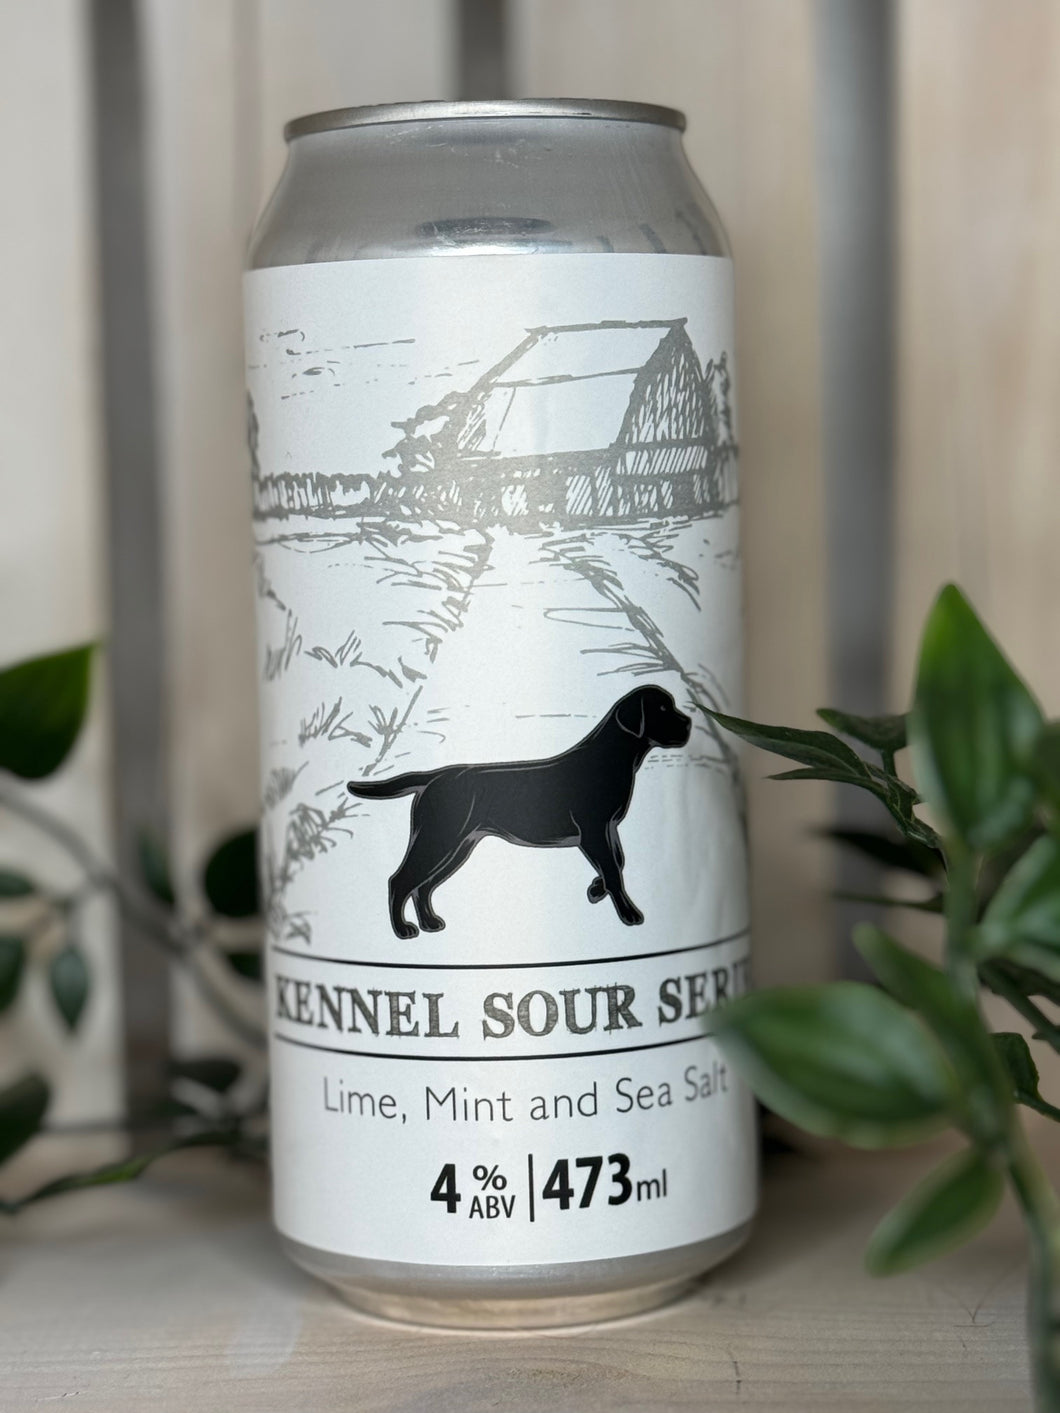 Lime, Mint and Sea Salt Kennel Sour